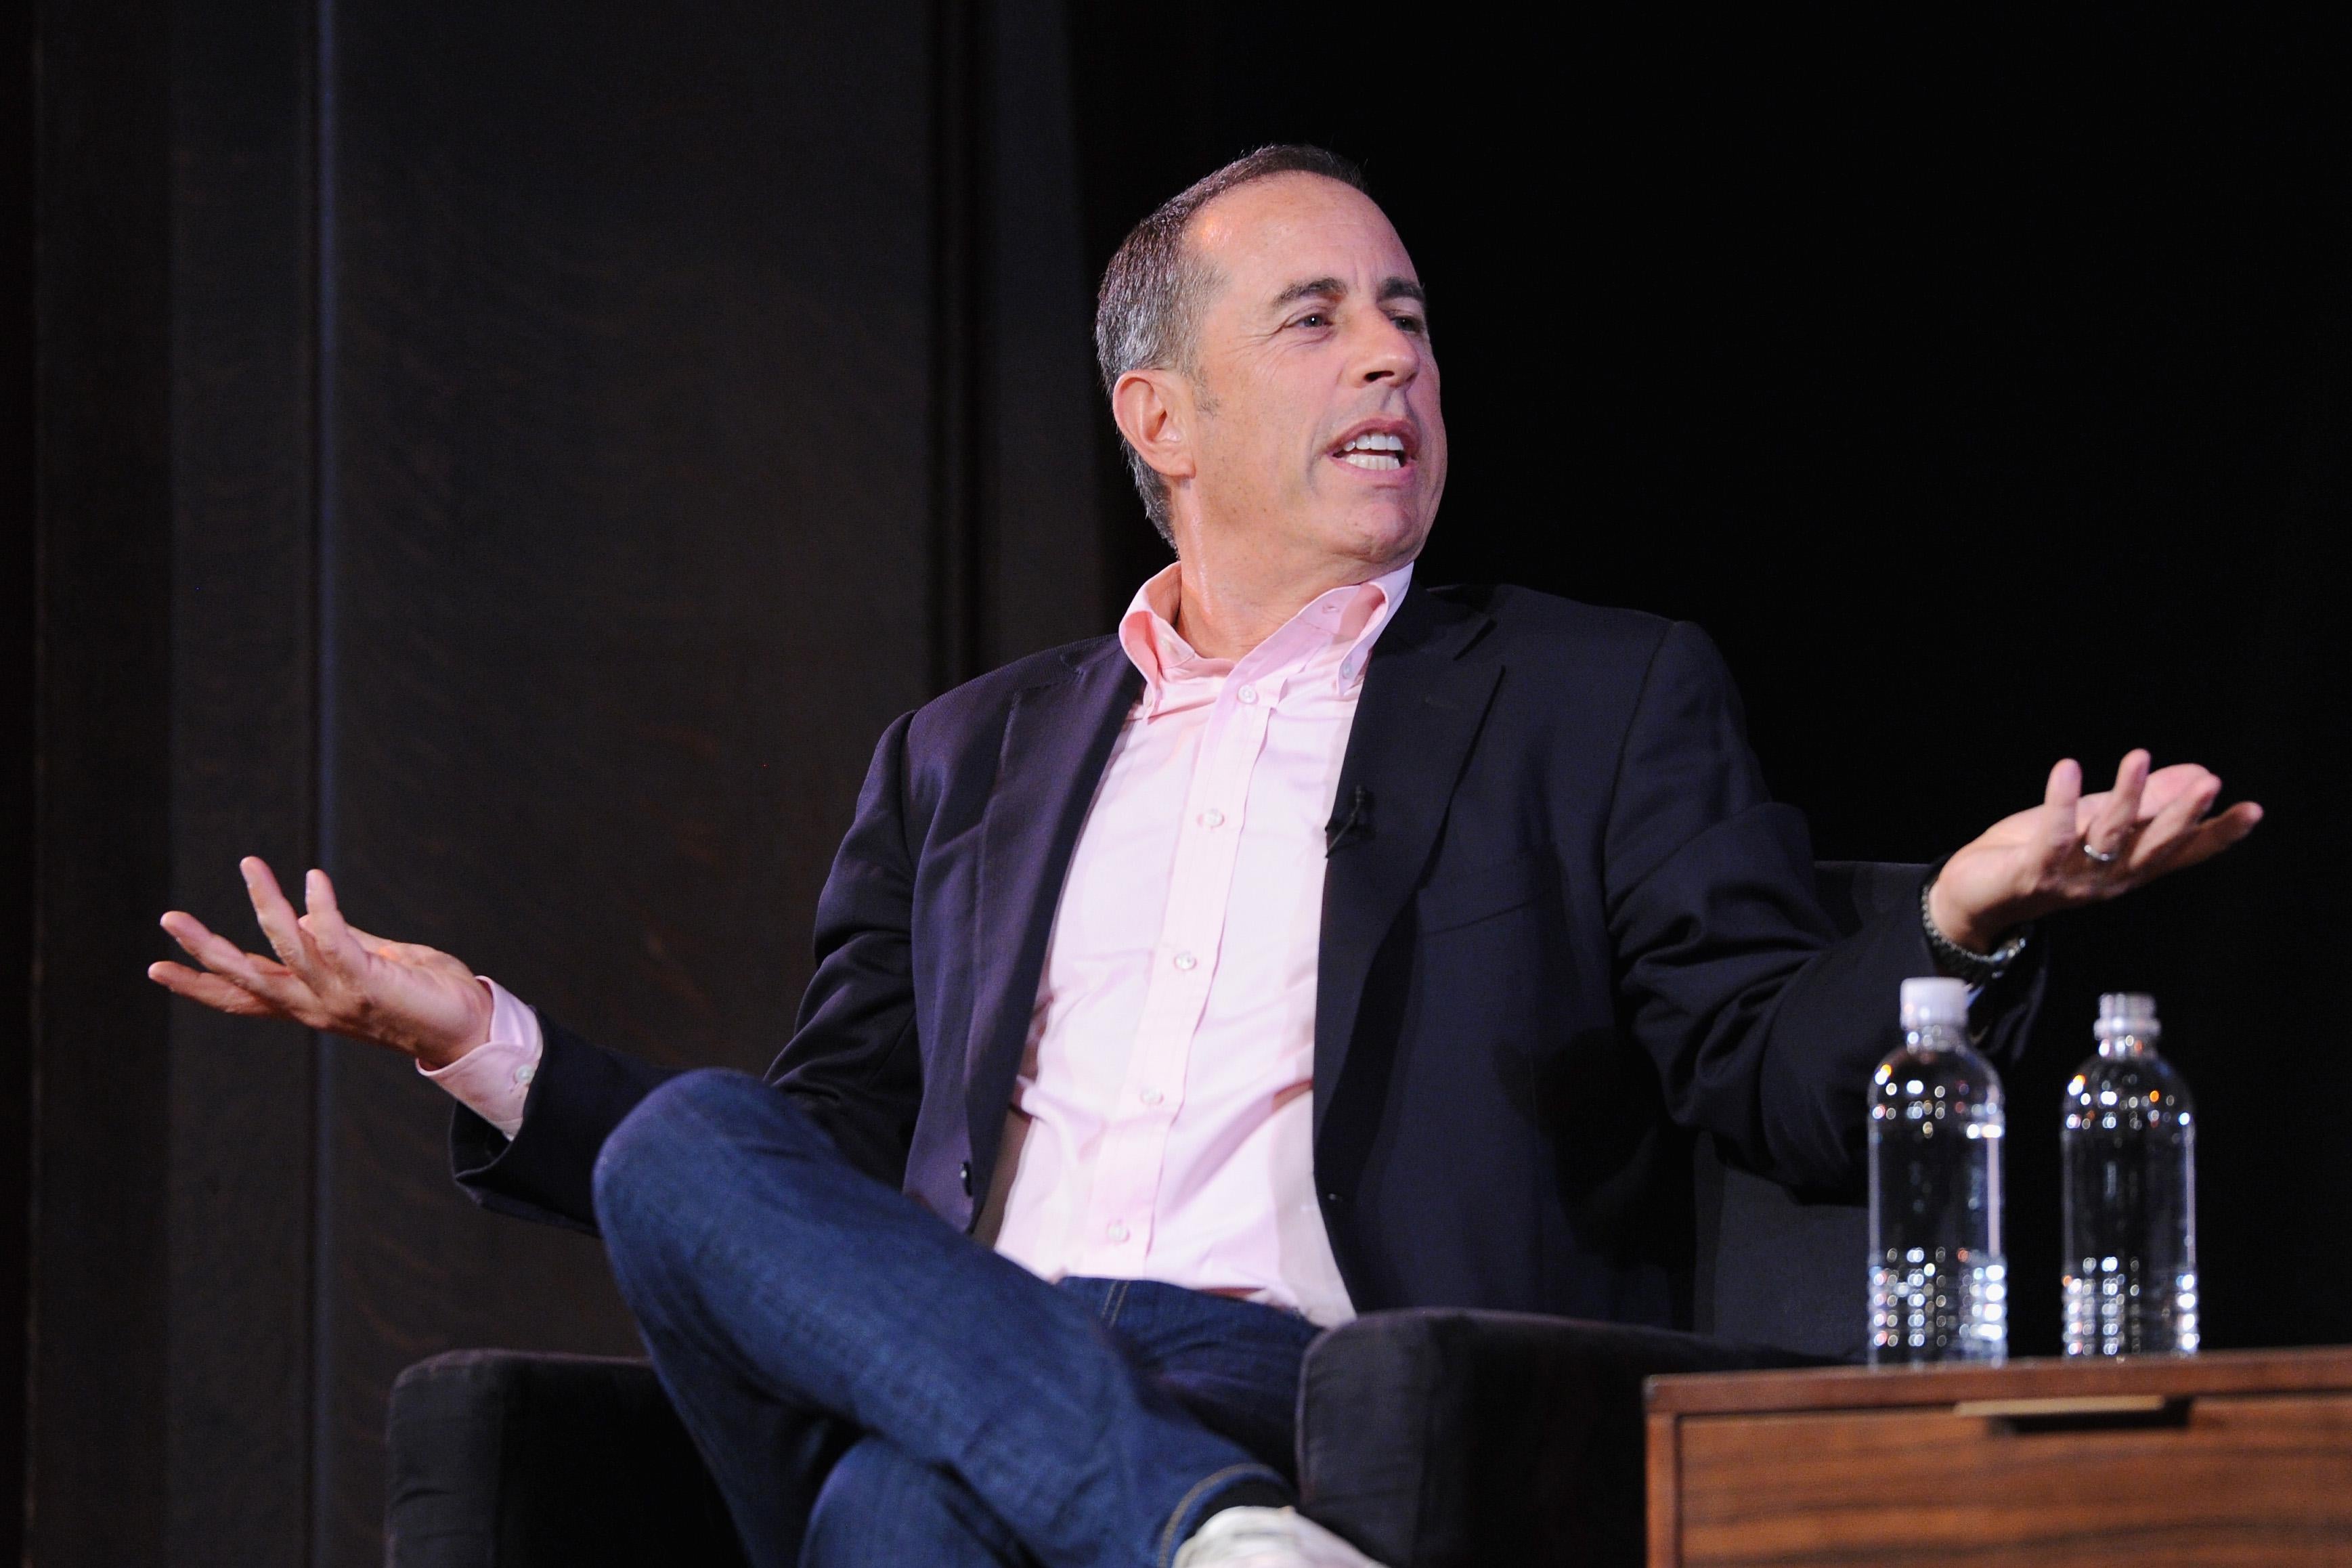 NEW YORK, NY - OCTOBER 06:  Jerry Seinfeld speaks onstage during the 2017 New Yorker Festival at New York Society for Ethical Culture on October 6, 2017 in New York City.  (Photo by Craig Barritt/Getty Images for The New Yorker)